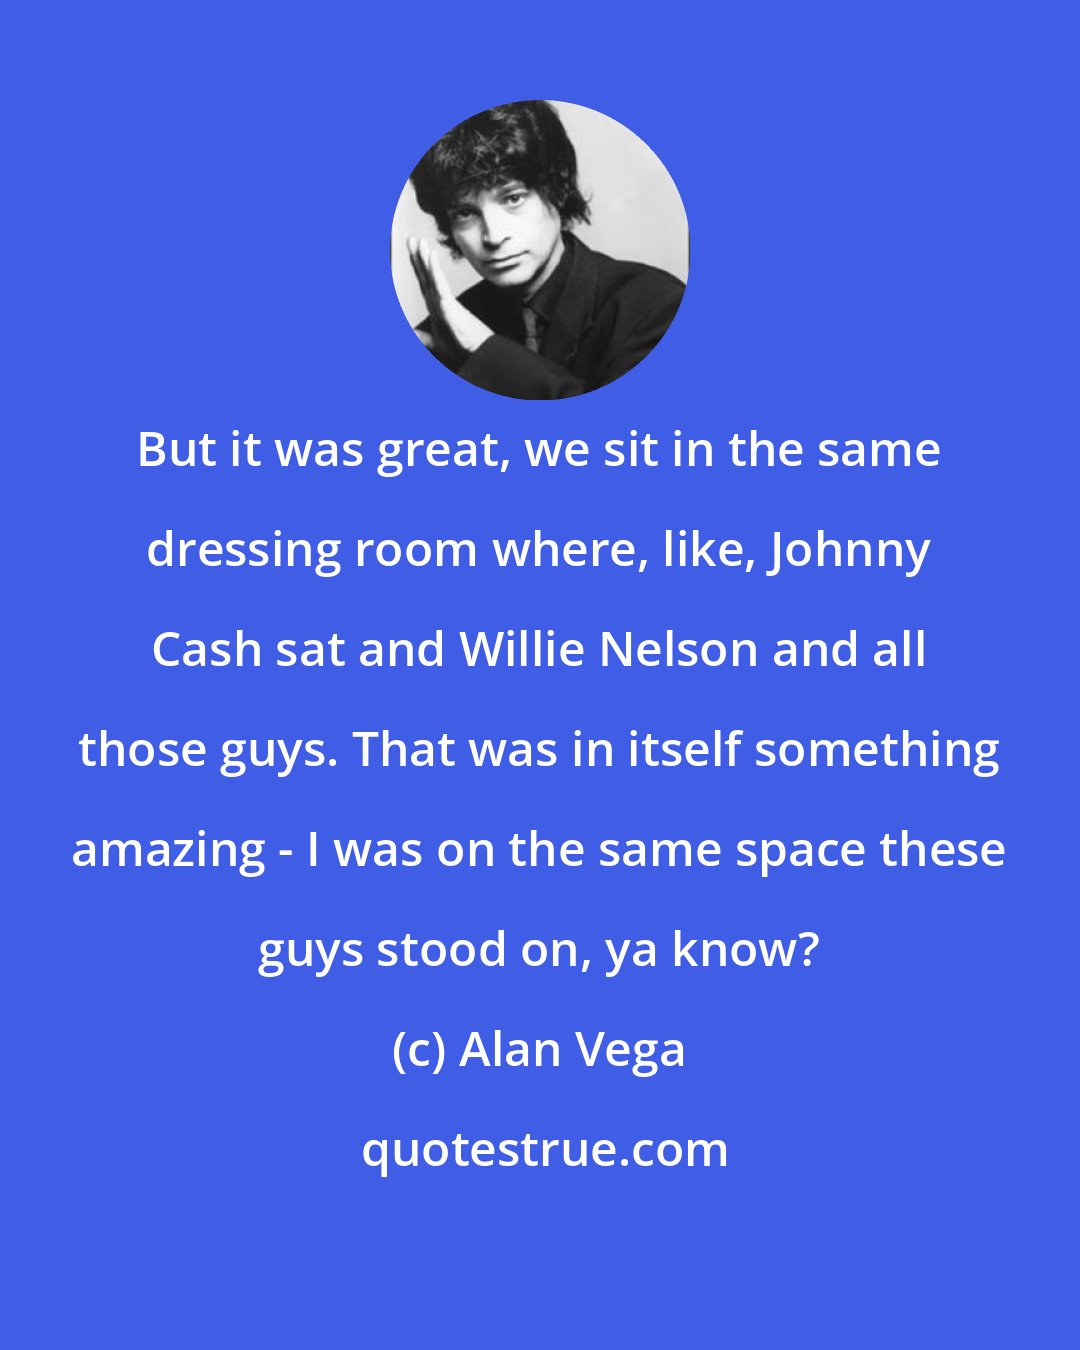 Alan Vega: But it was great, we sit in the same dressing room where, like, Johnny Cash sat and Willie Nelson and all those guys. That was in itself something amazing - I was on the same space these guys stood on, ya know?